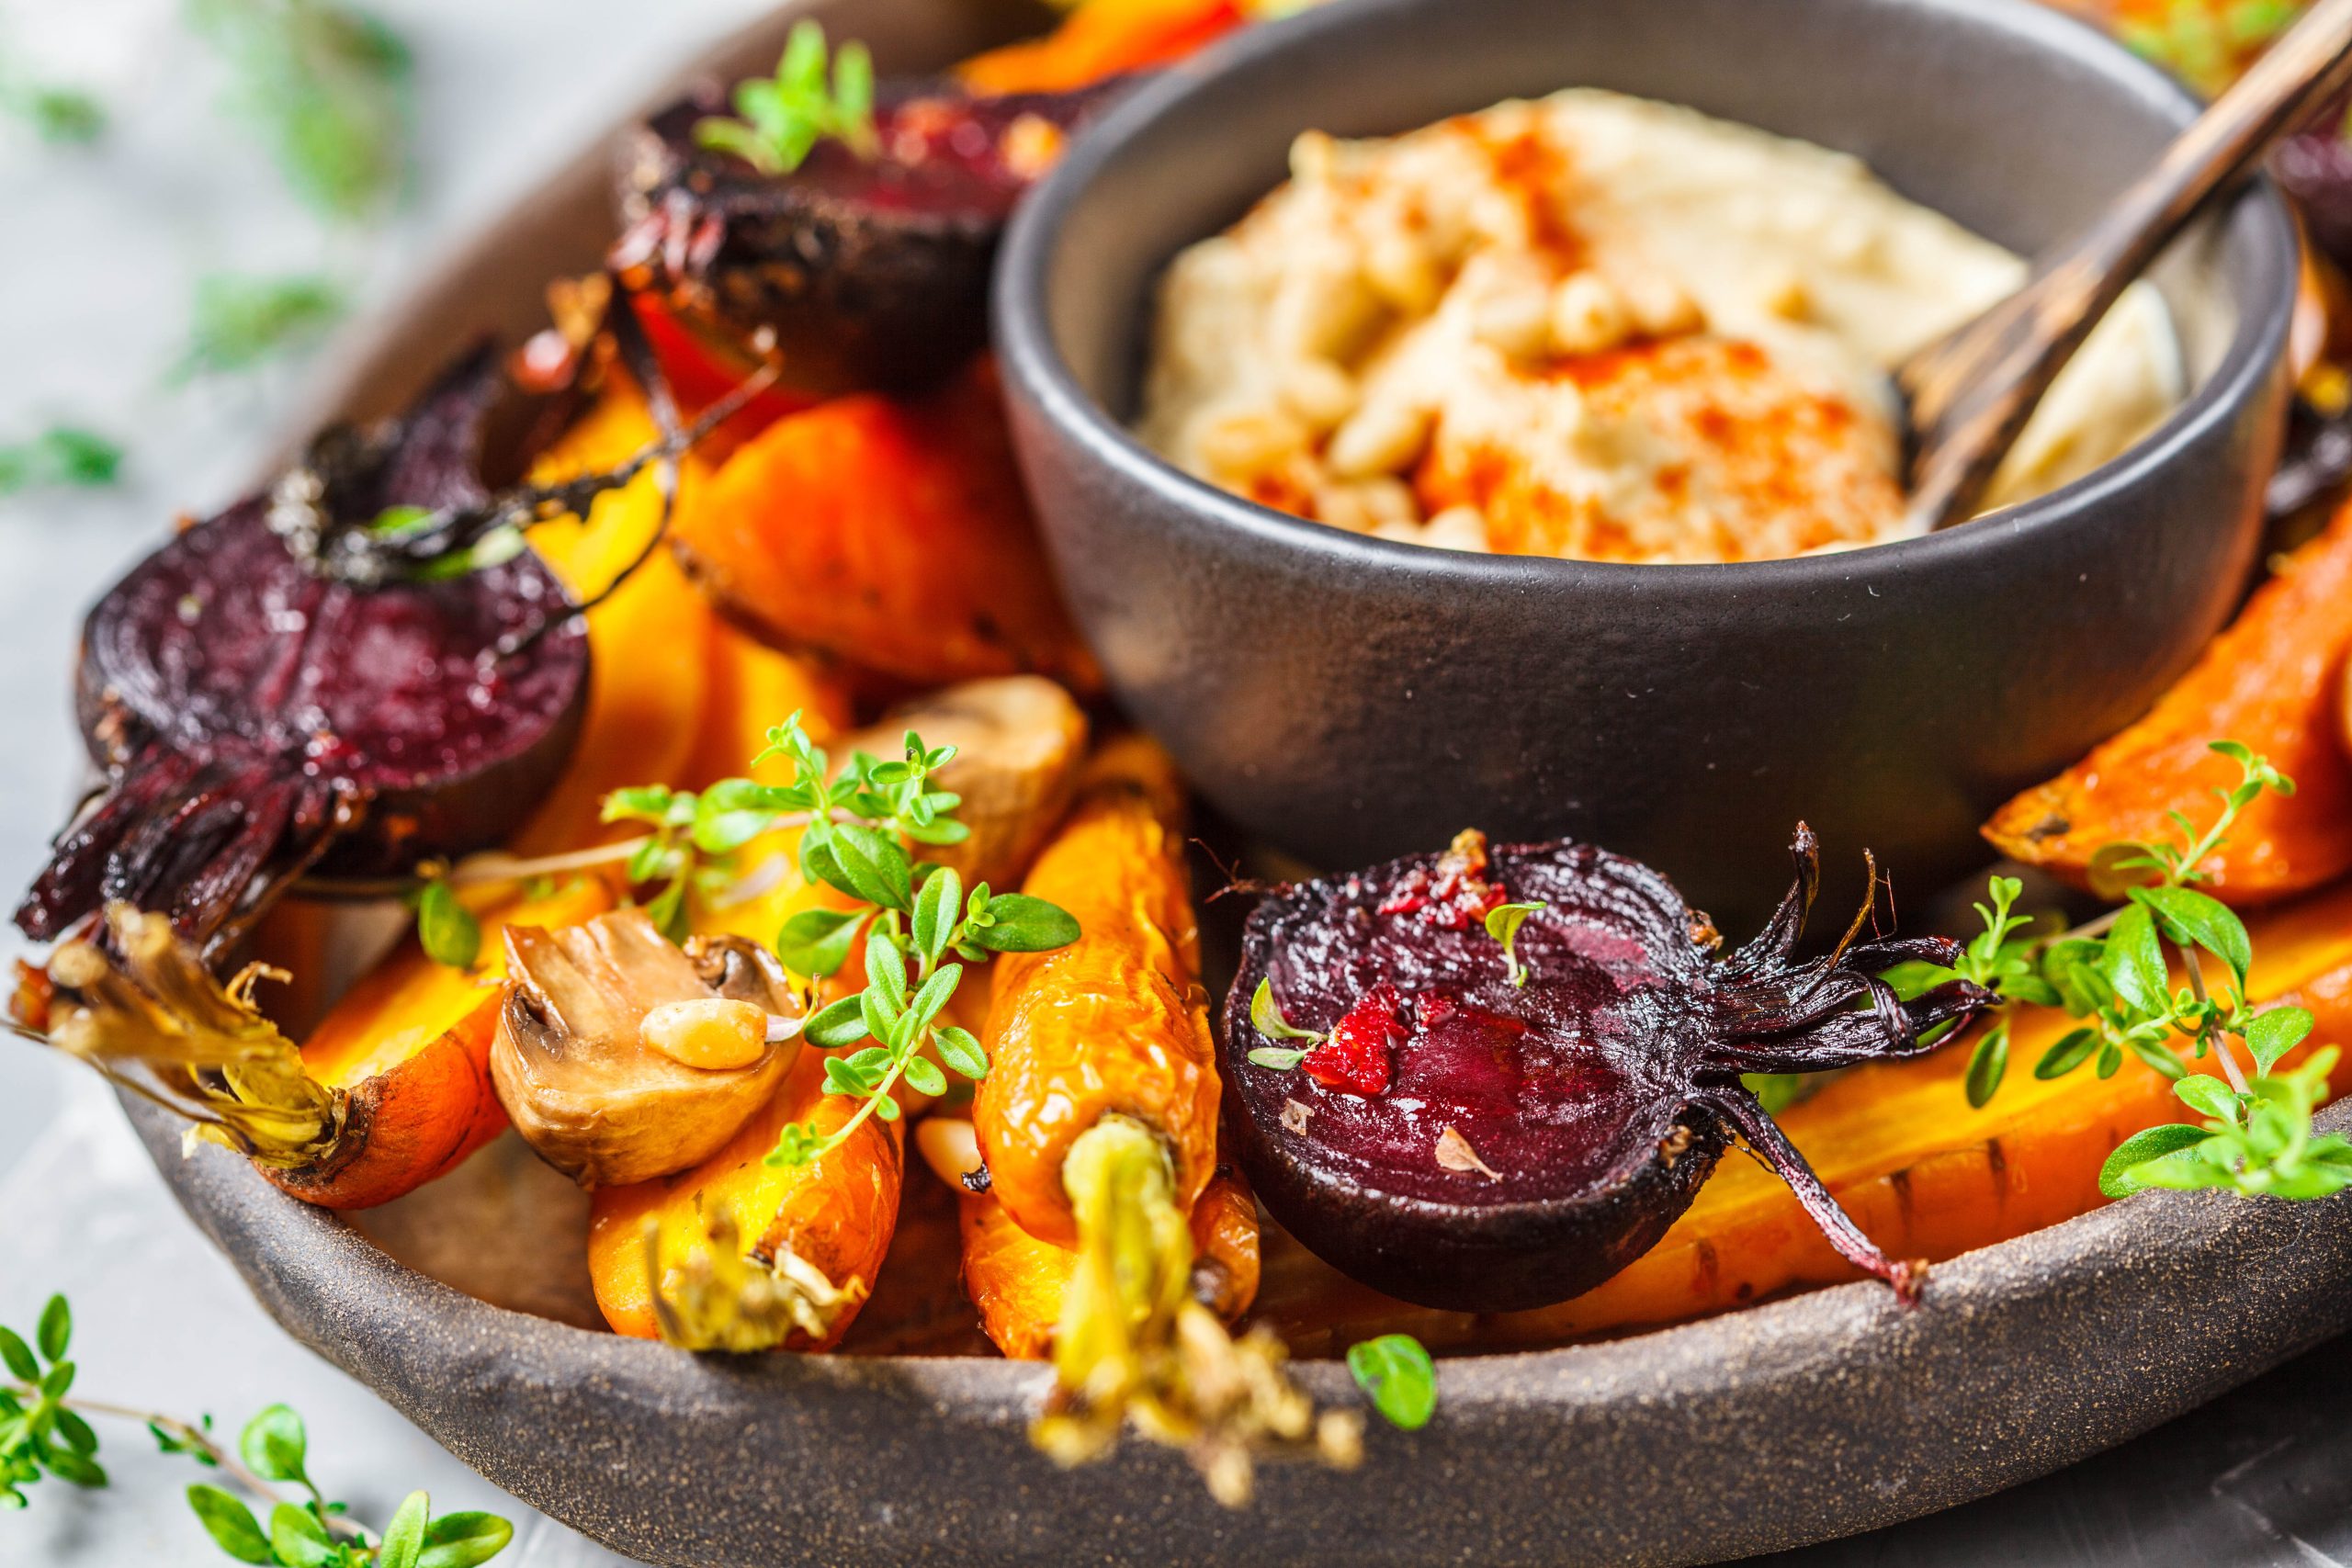 Baked carrots, beets, zucchini and yam with hummus in a dark dish.